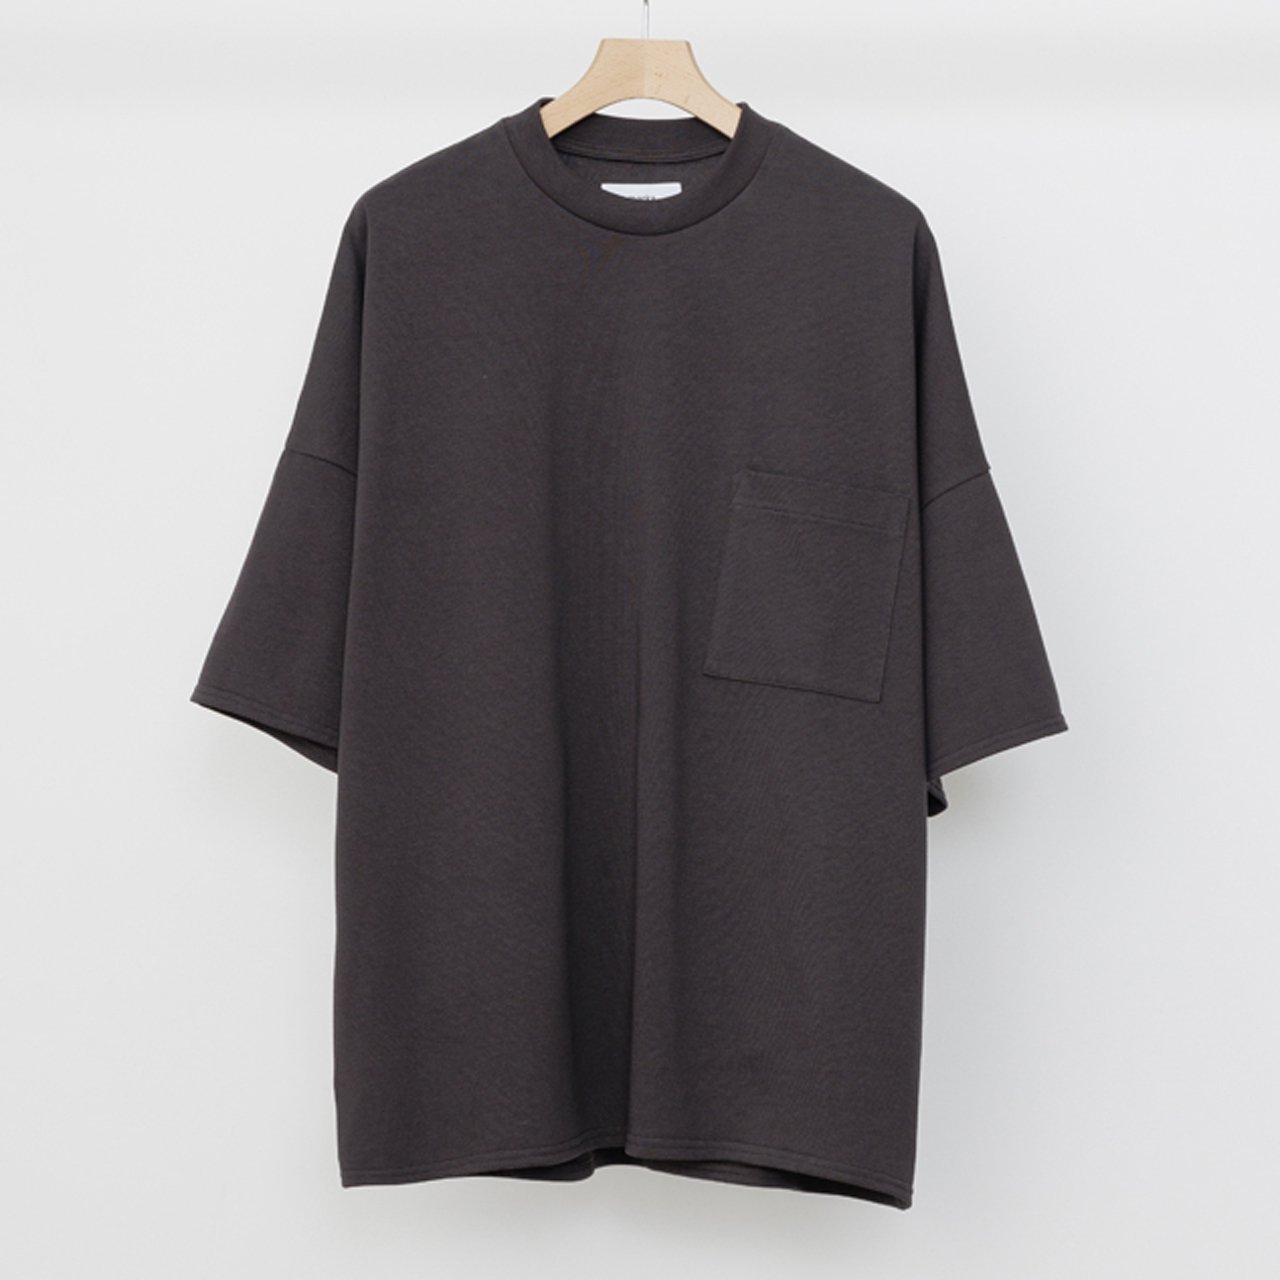 <img class='new_mark_img1' src='https://img.shop-pro.jp/img/new/icons5.gif' style='border:none;display:inline;margin:0px;padding:0px;width:auto;' />marka (ޡ)POCKET TEE DARK BROWN -20//1 RECYCLE SUVIN ORGANIAC COTTON KNIT-